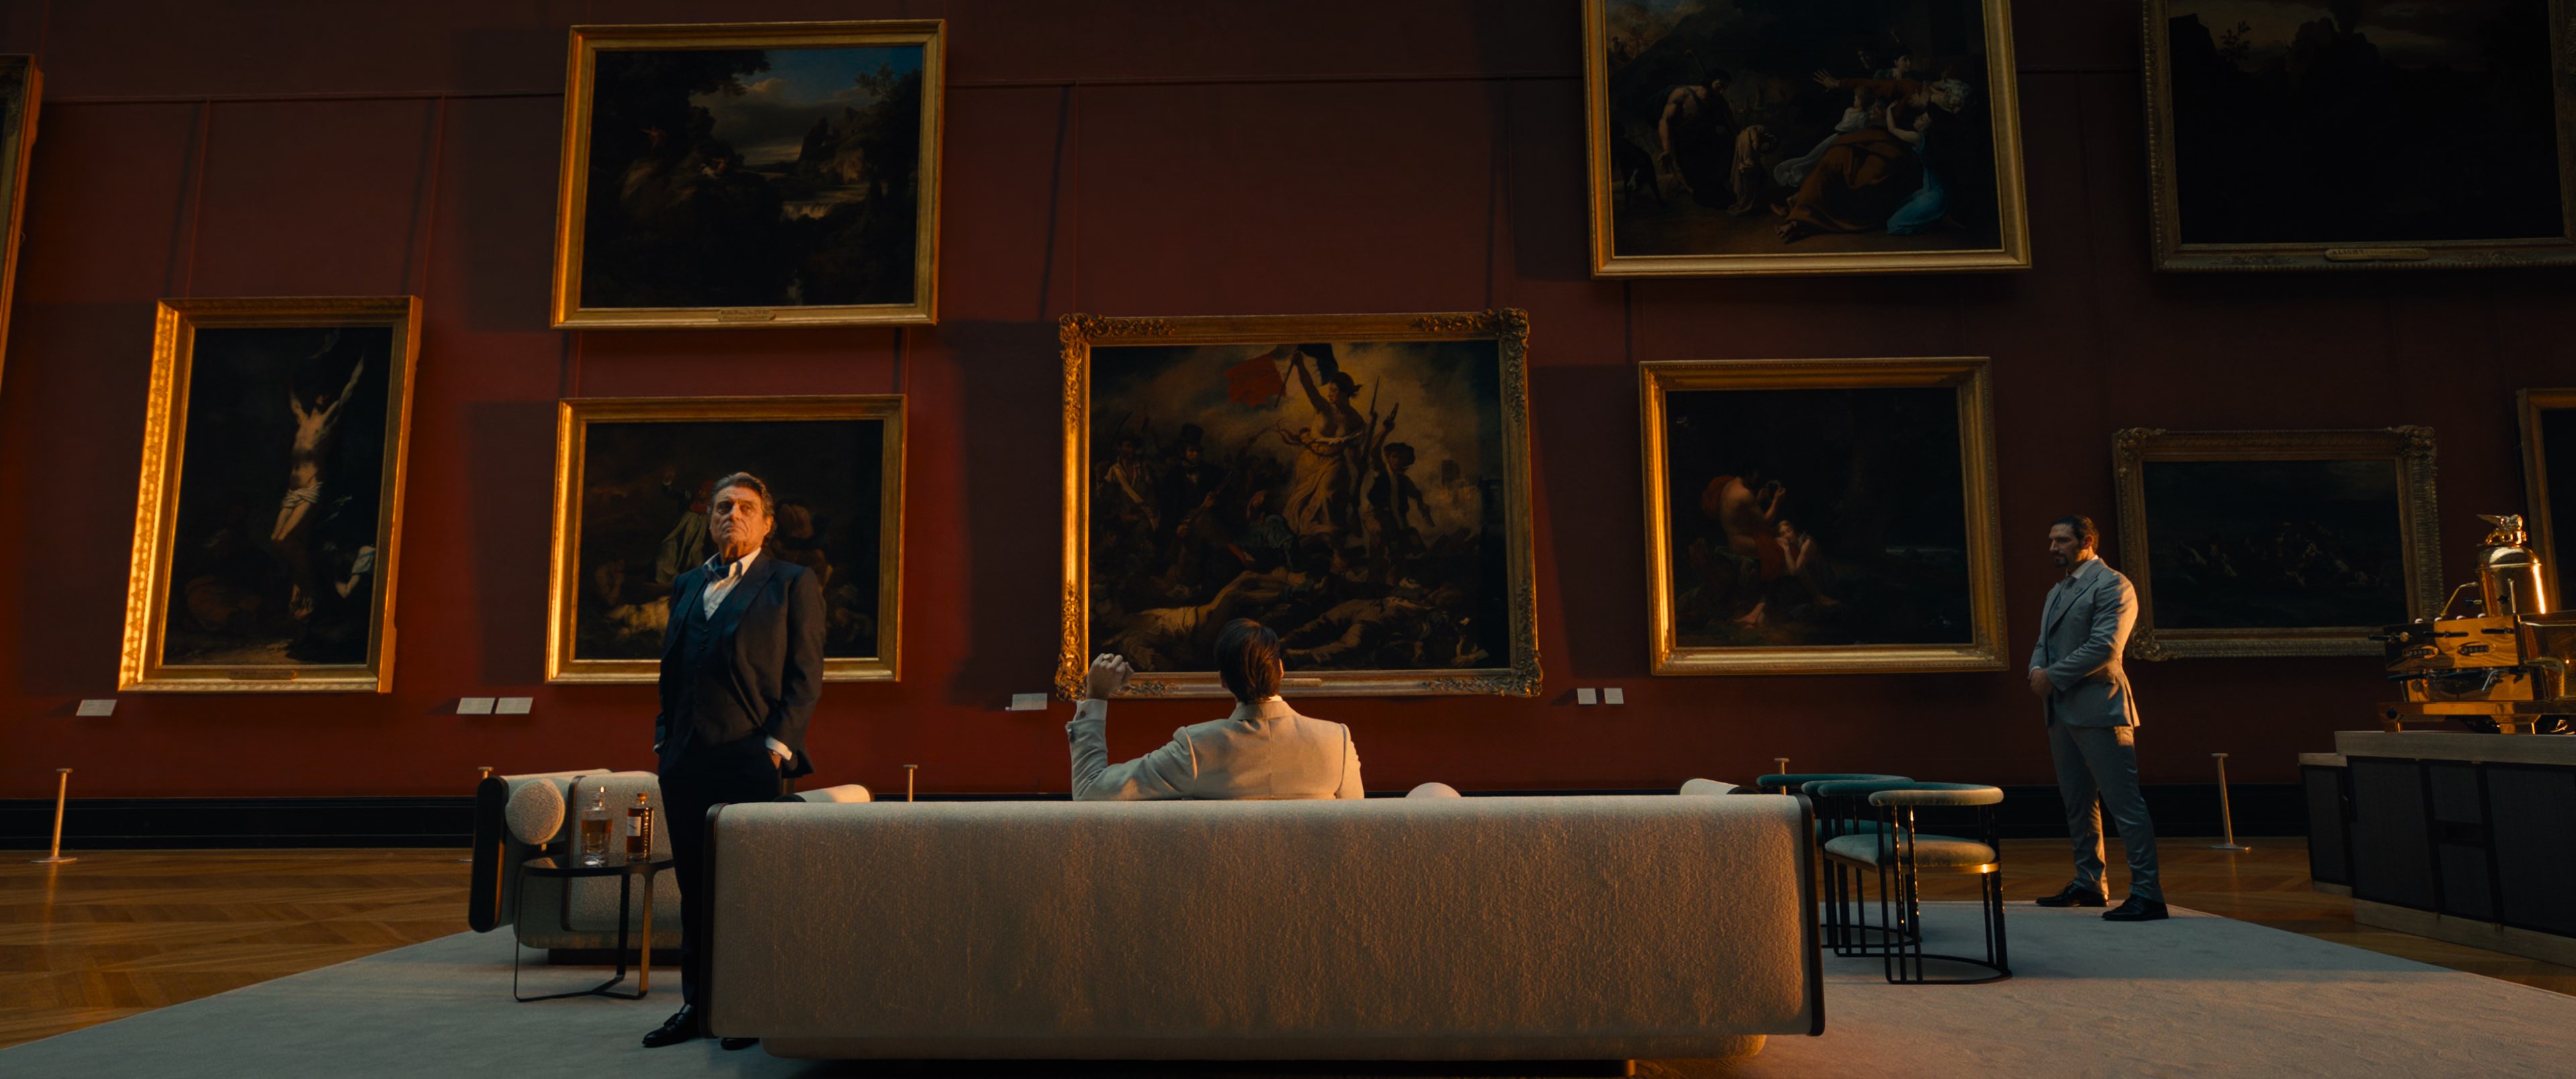 John Wick Louvre Painting Bill Skarsgard Film Stills Movies Picture Frames Standing Suits Chair Couc 3840x1608